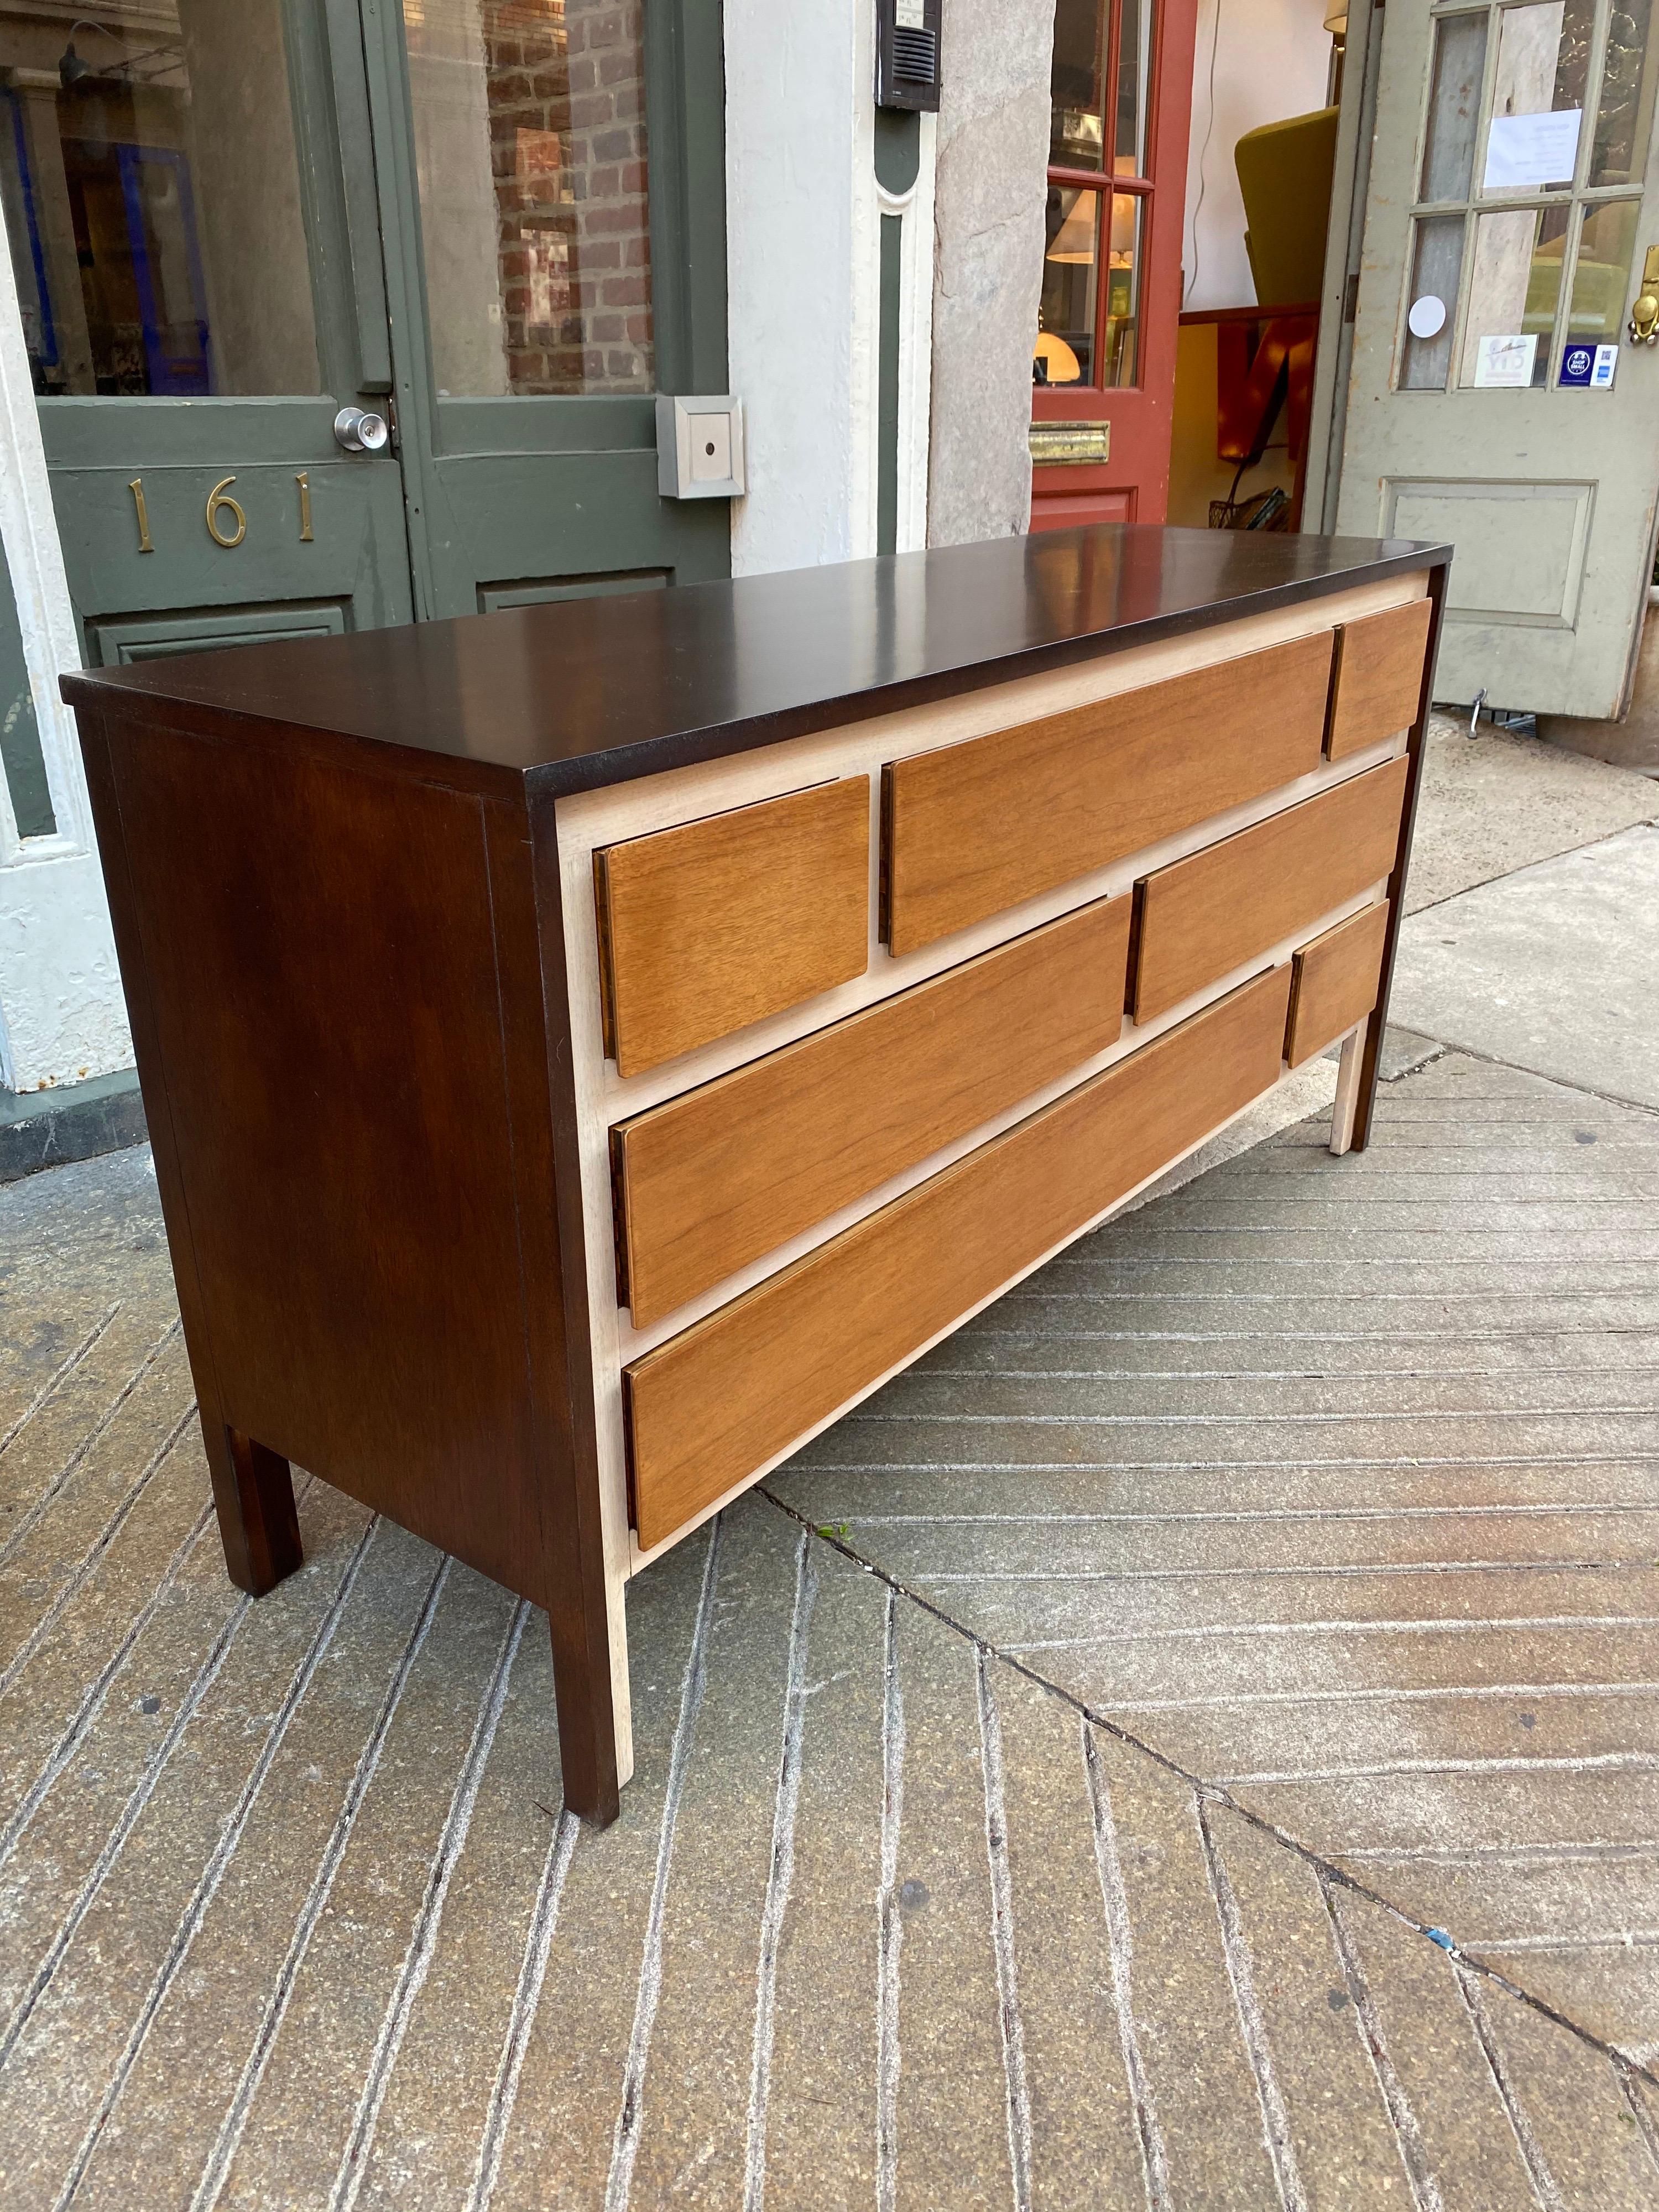 Henredon low dresser in the style of Gio Ponti. Based on Gio Ponti's 1958 Design that he did for The Singer Furniture Company. Outer cabinet was refinished in a dark walnut, drawer fronts in a light walnut. Behind the Drawer Fronts cream background.